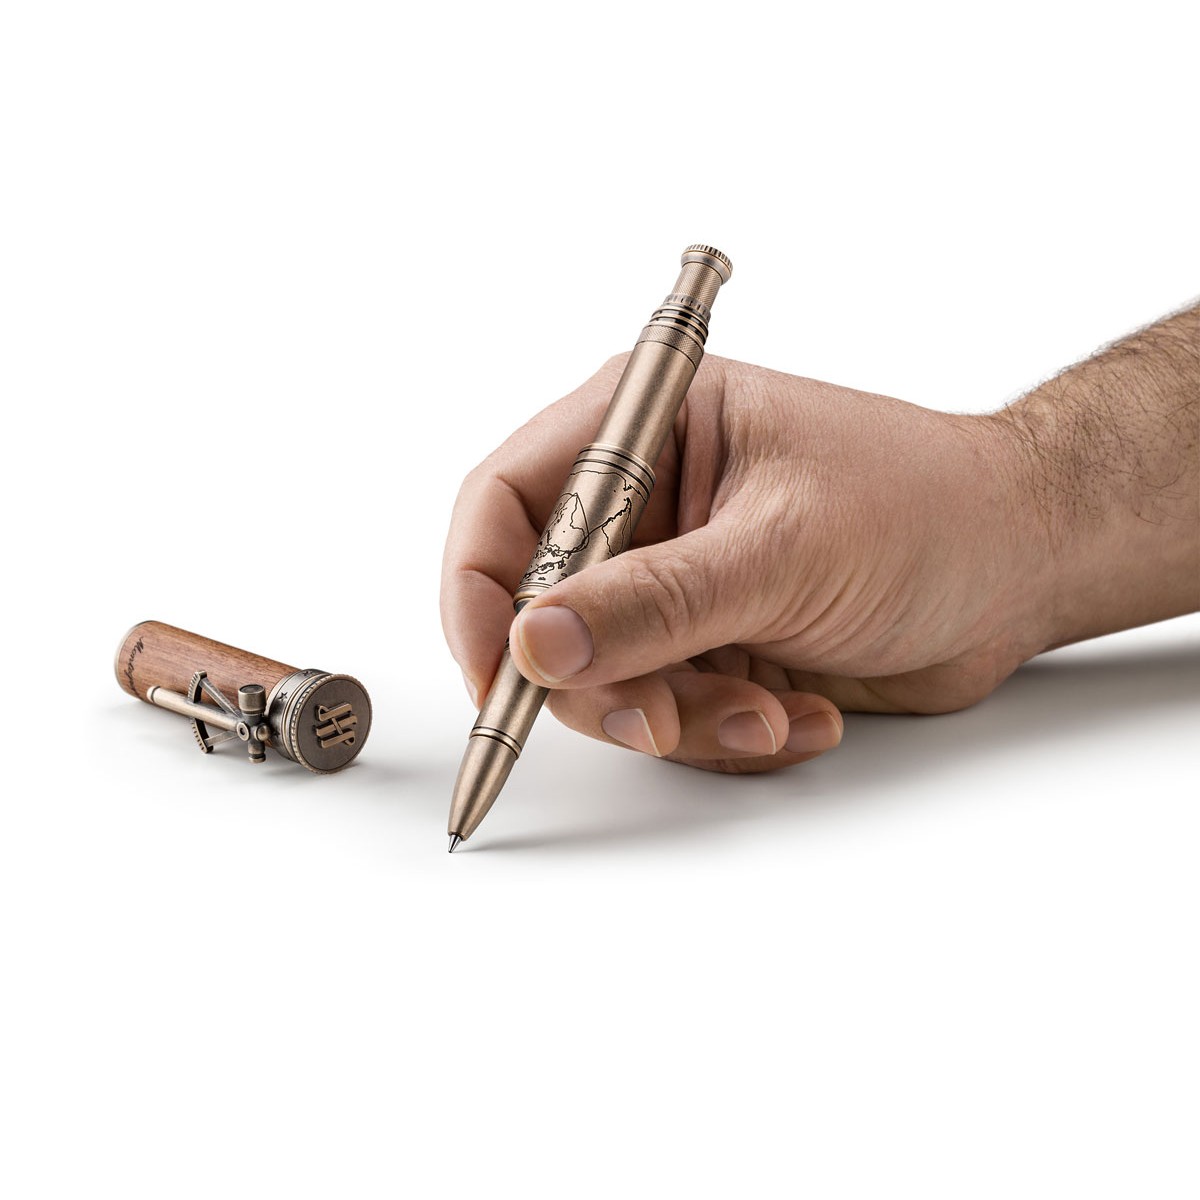 Montegrappa - Age of Discovery - Roller - Limited Edition